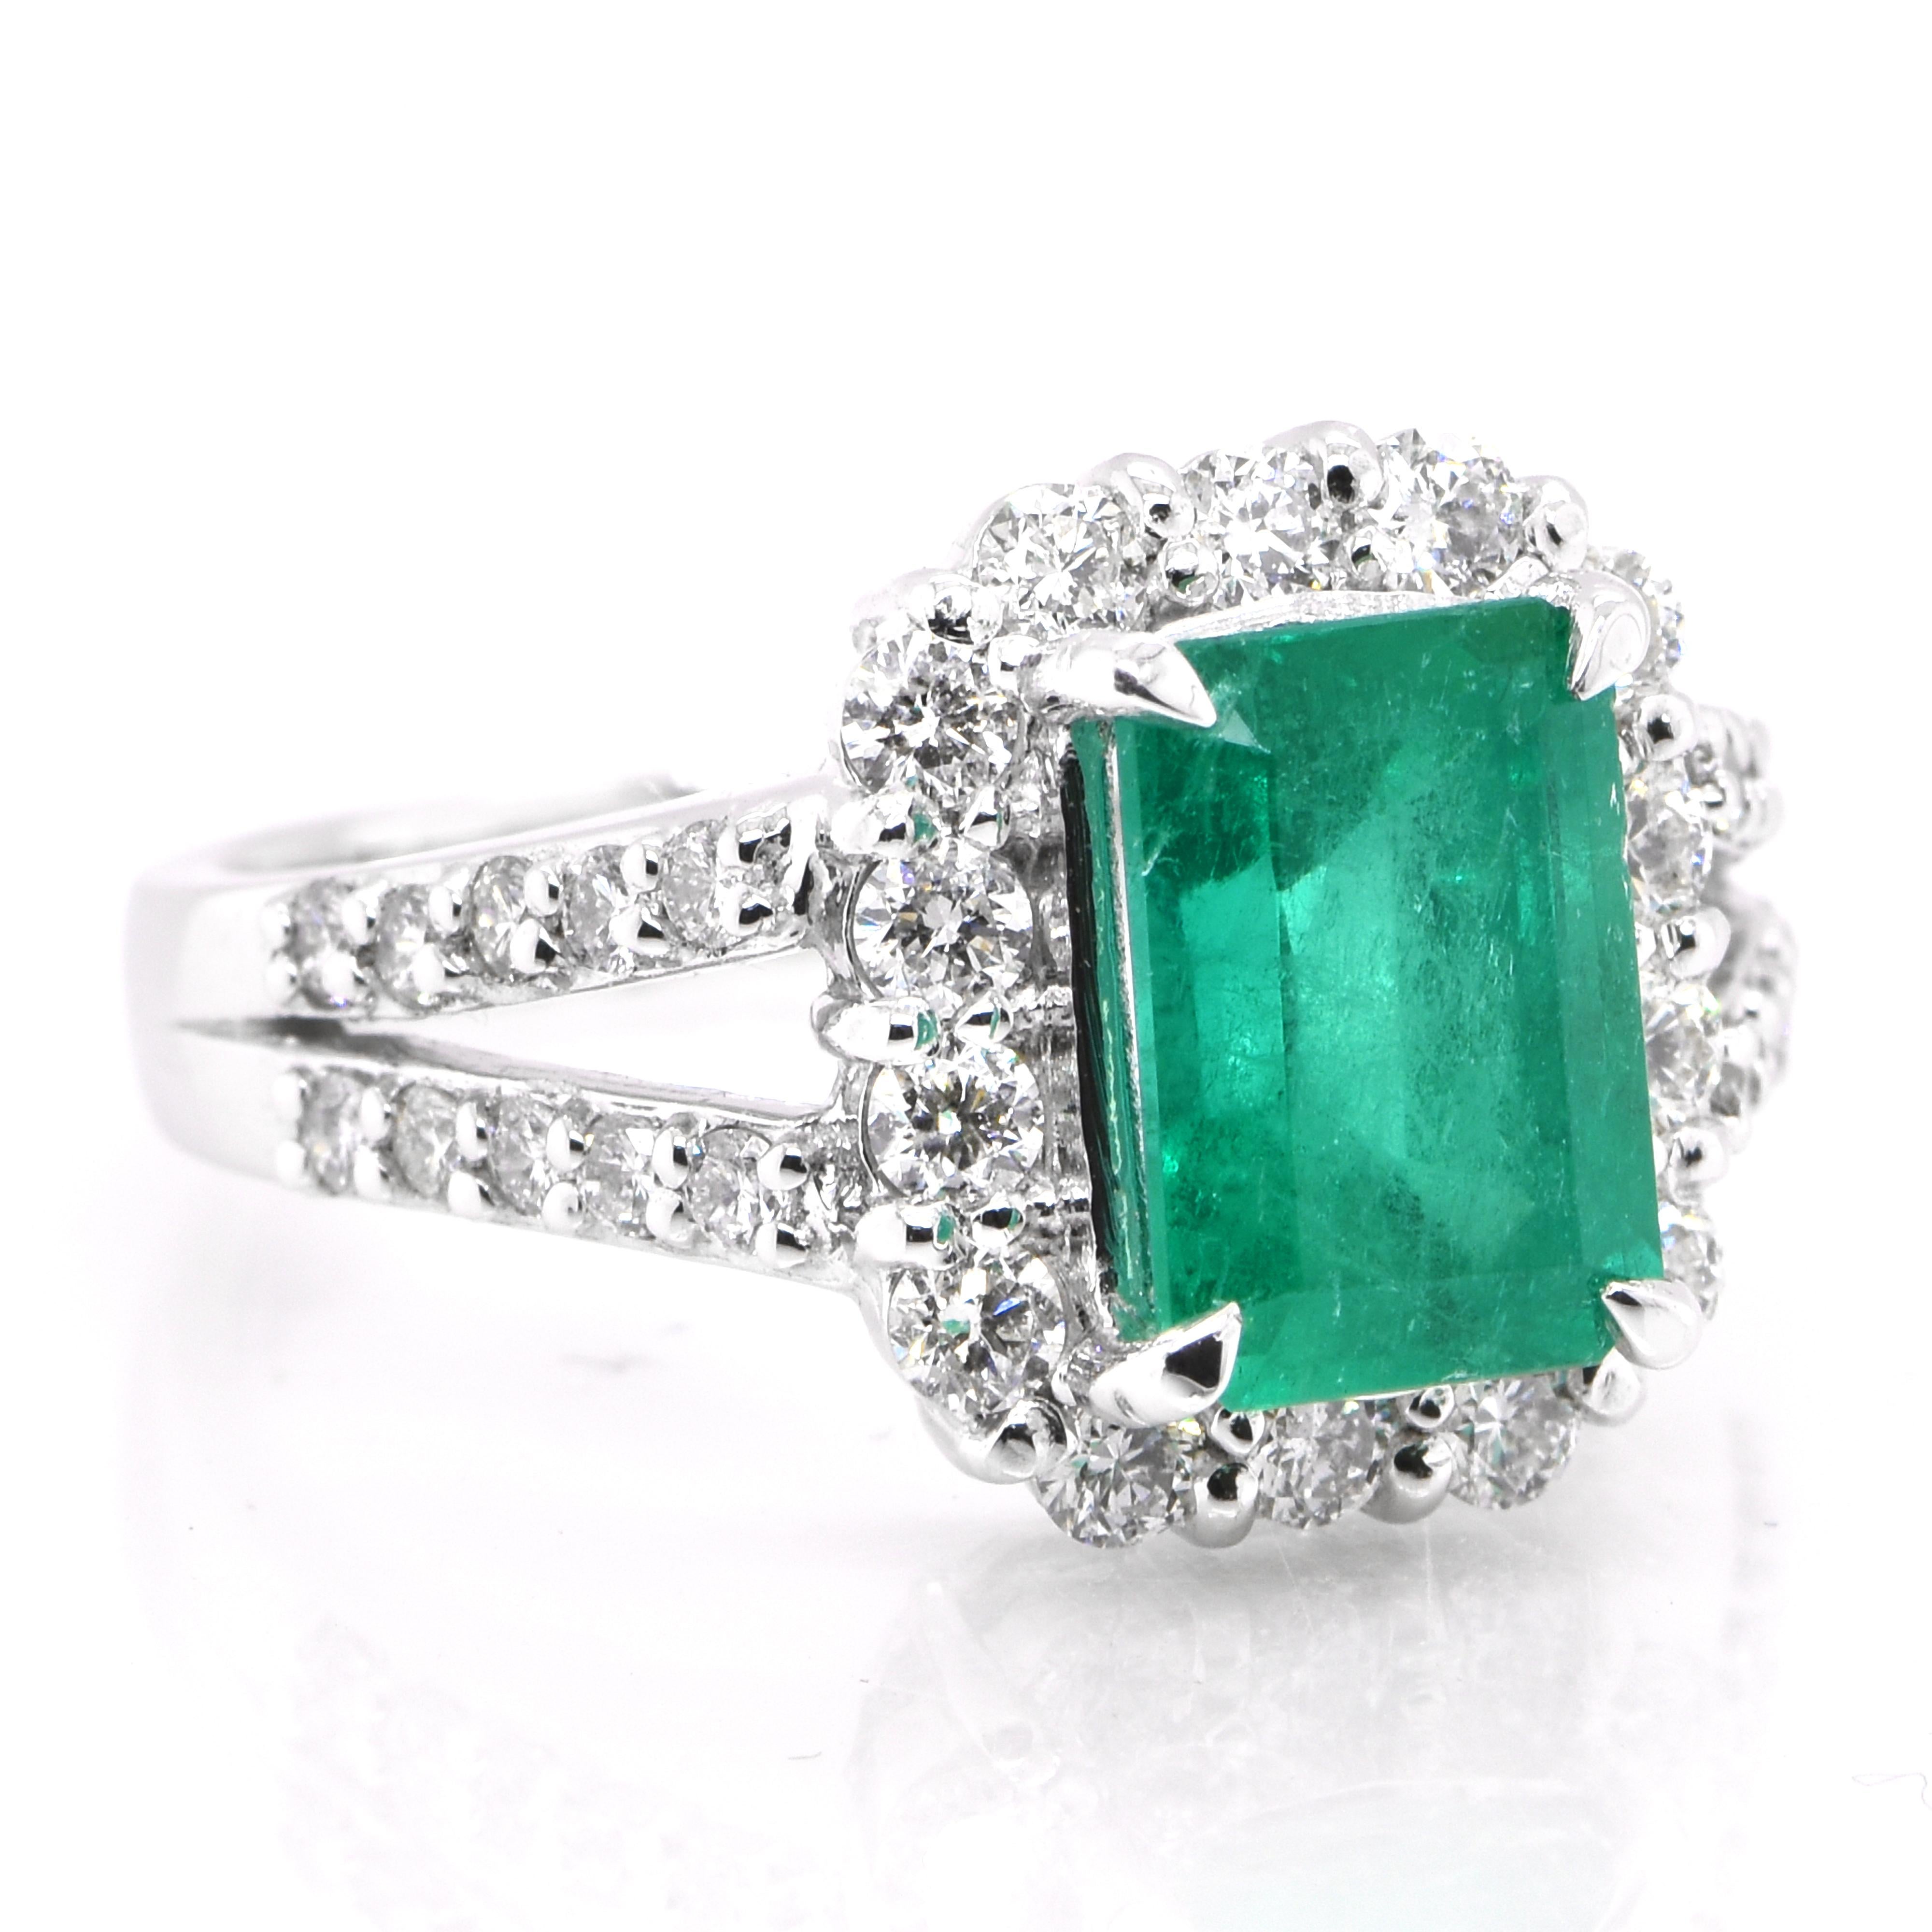 Modern 2.49 Carat Colombian Emerald and Diamond Ring Set in Platinum For Sale